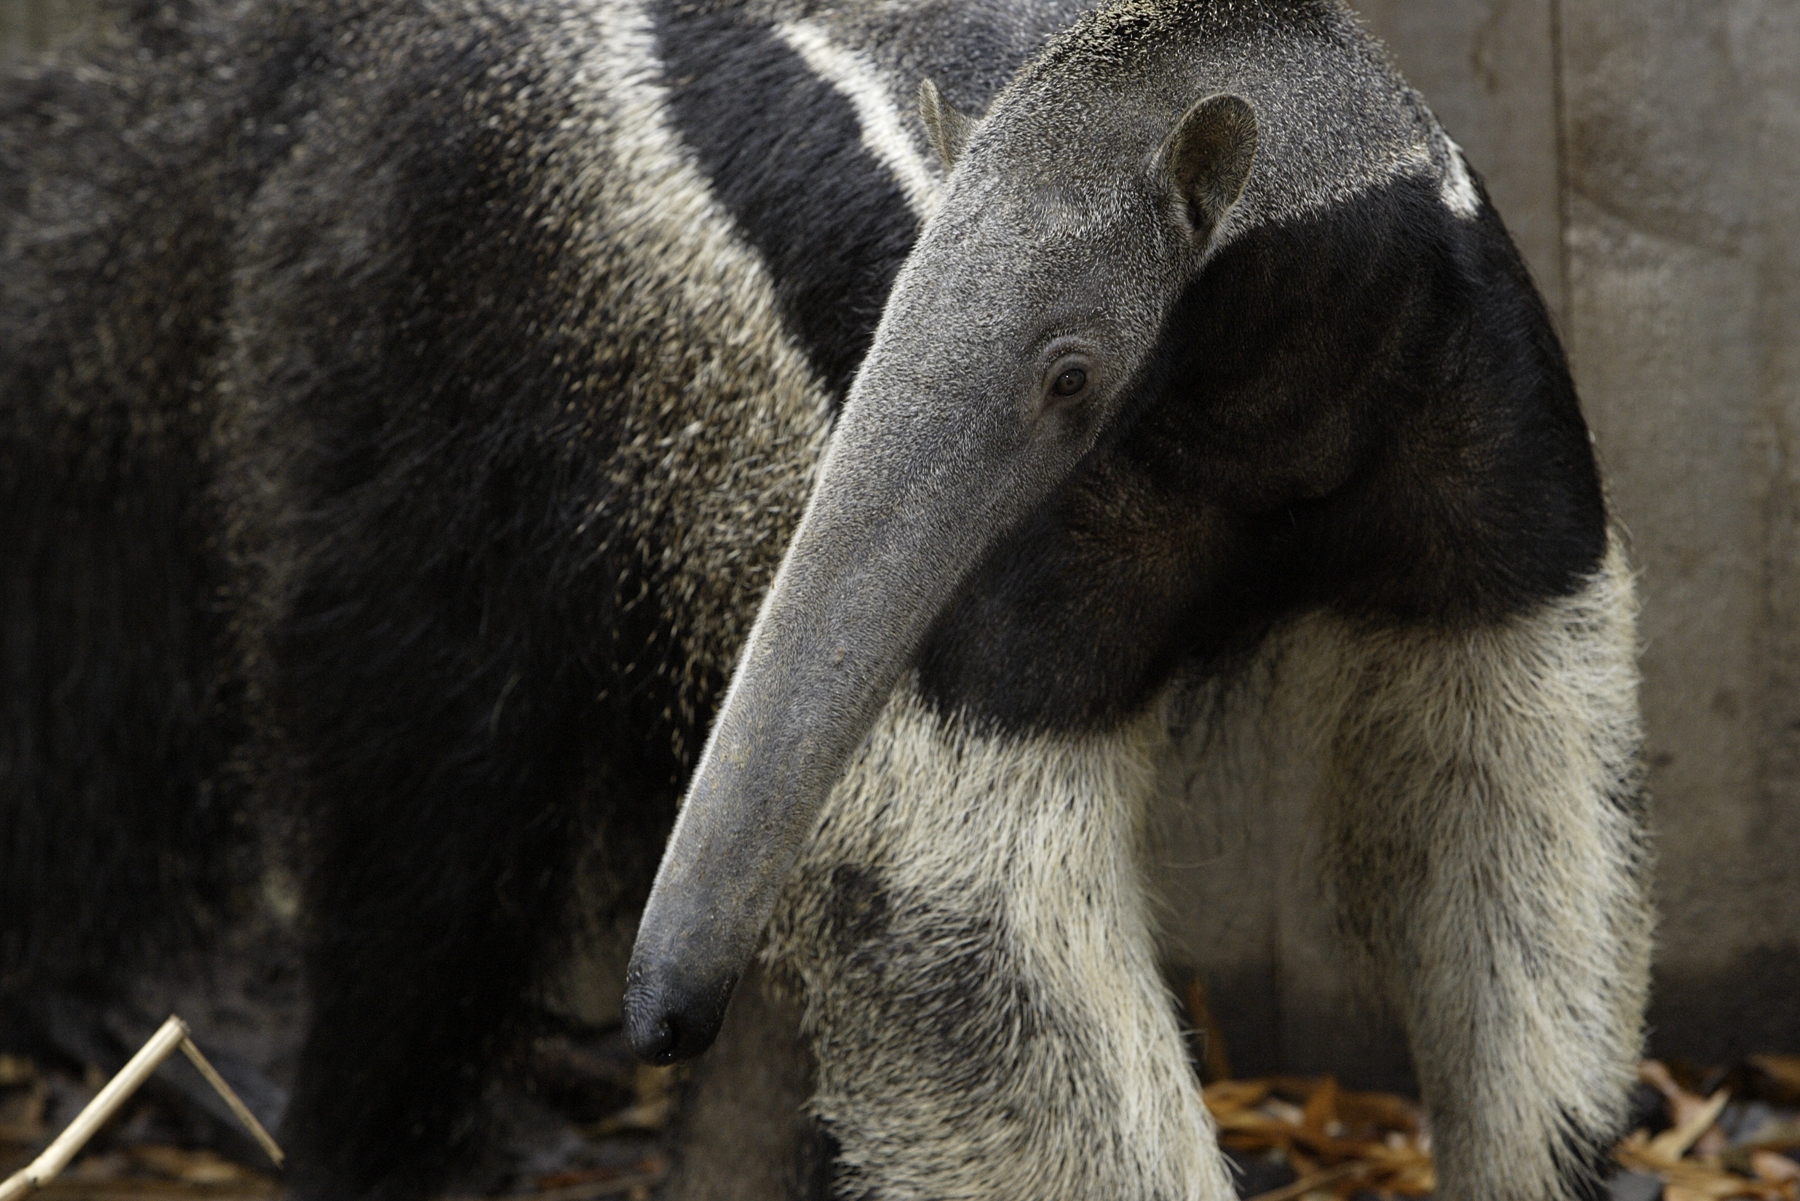 Giant Anteater Born at the National Zoo | Smithsonian Institution